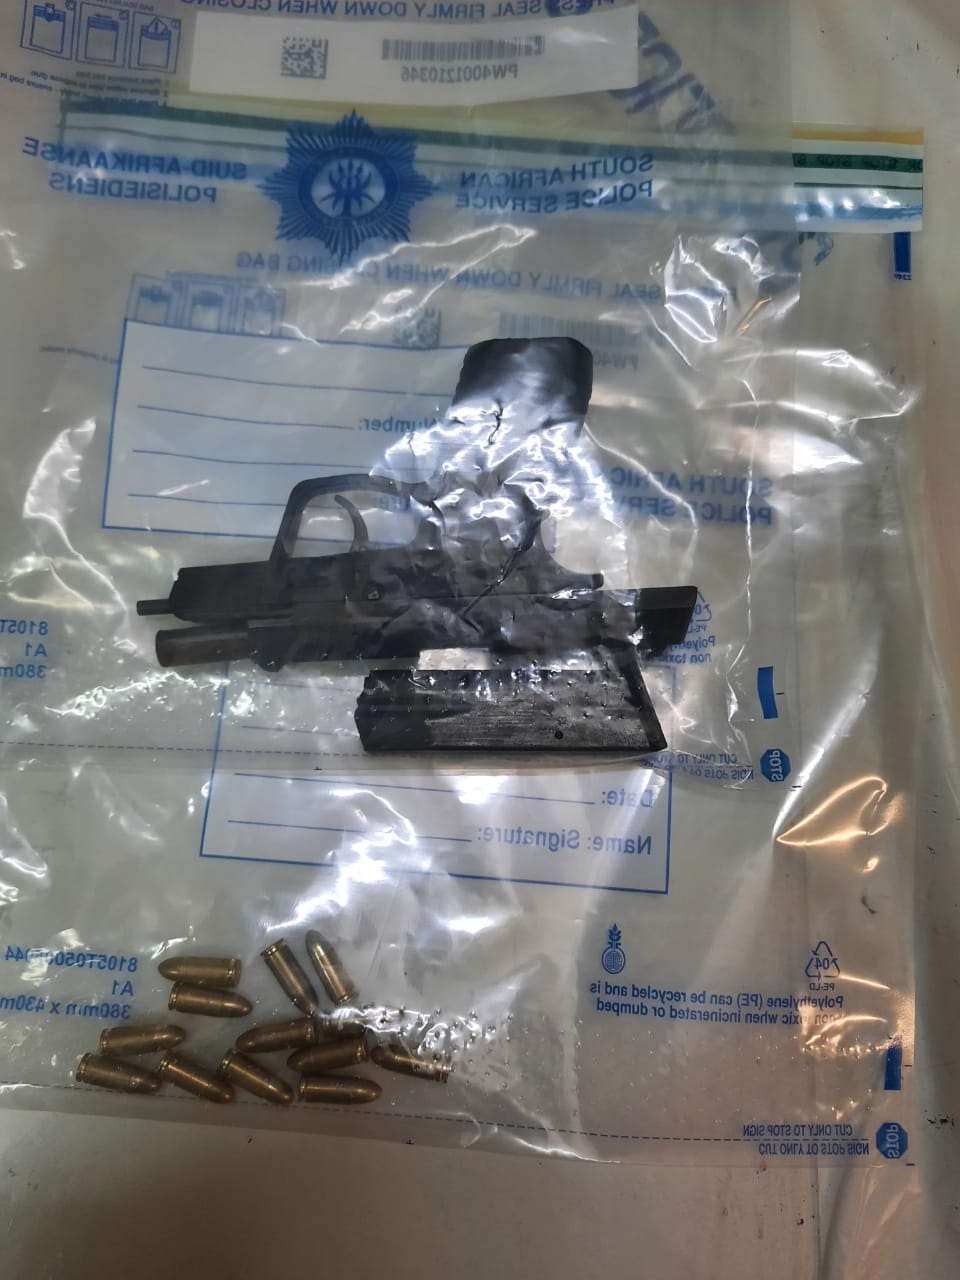 Manenberg SAPS members arrest alleged gang affiliate with prohibited firearm and ammunition